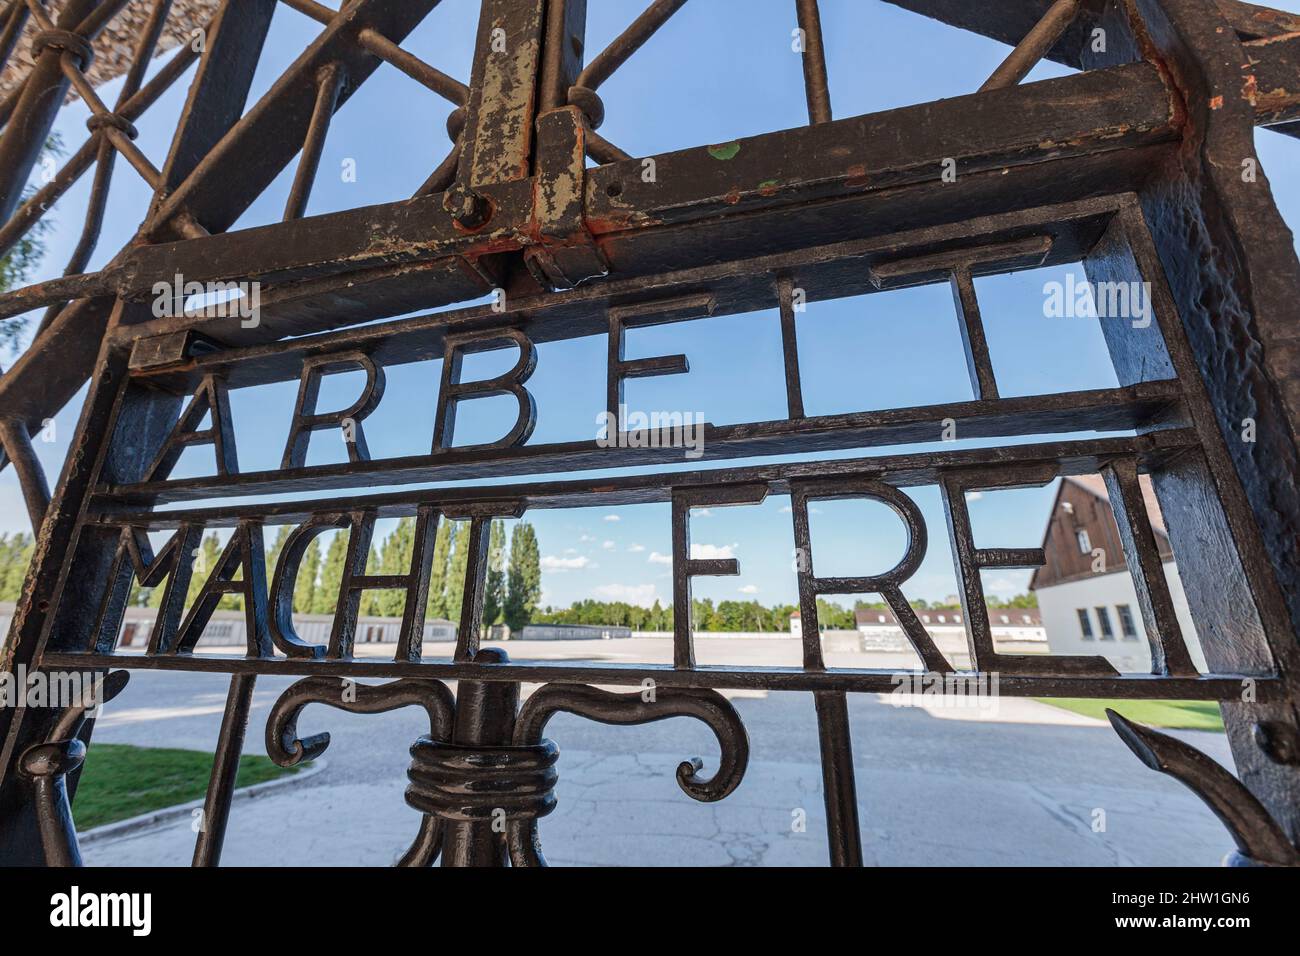 Germany, Bavaria, Dachau, Concentration Camp, entrance gate (Jourhaus), bearing the inscription Arbeit macht frei (Work makes one free), seen from outside the camp Stock Photo